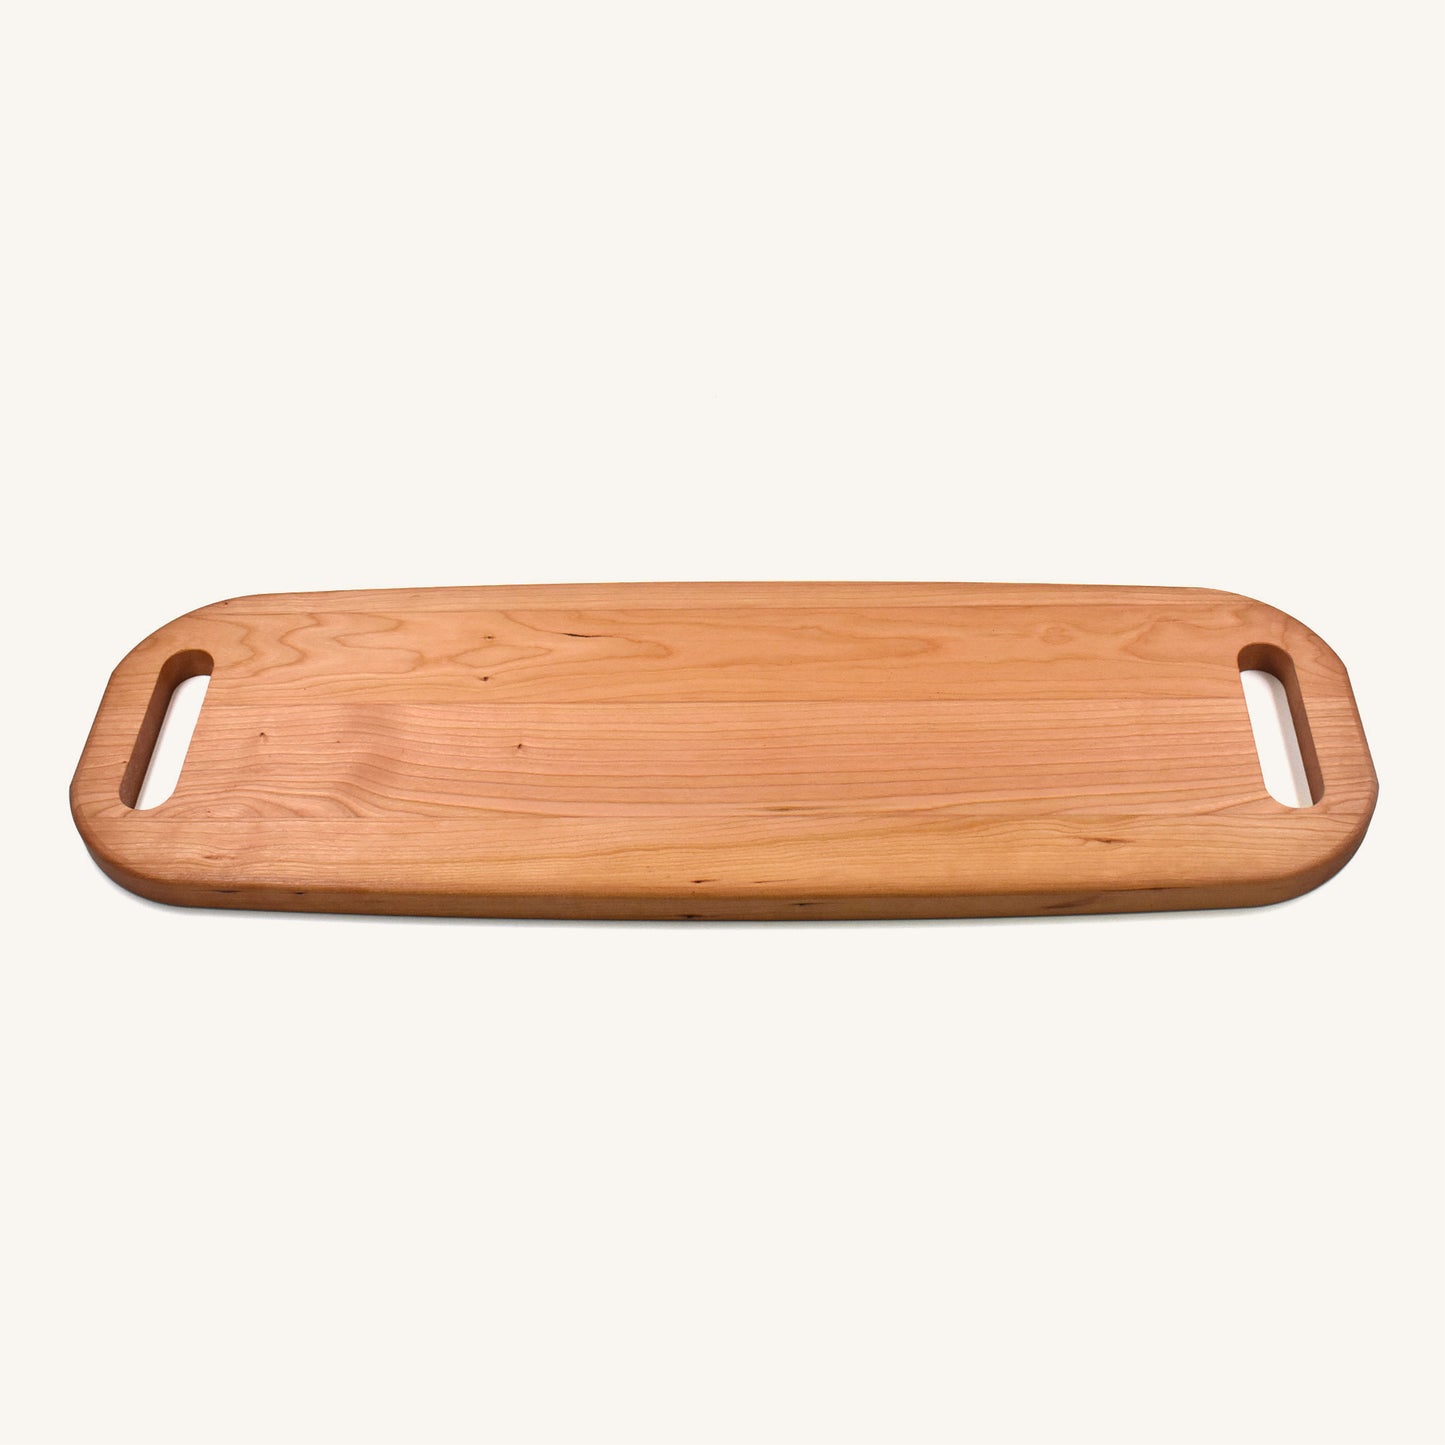 Wood Serving Tray with Handles on Both Ends